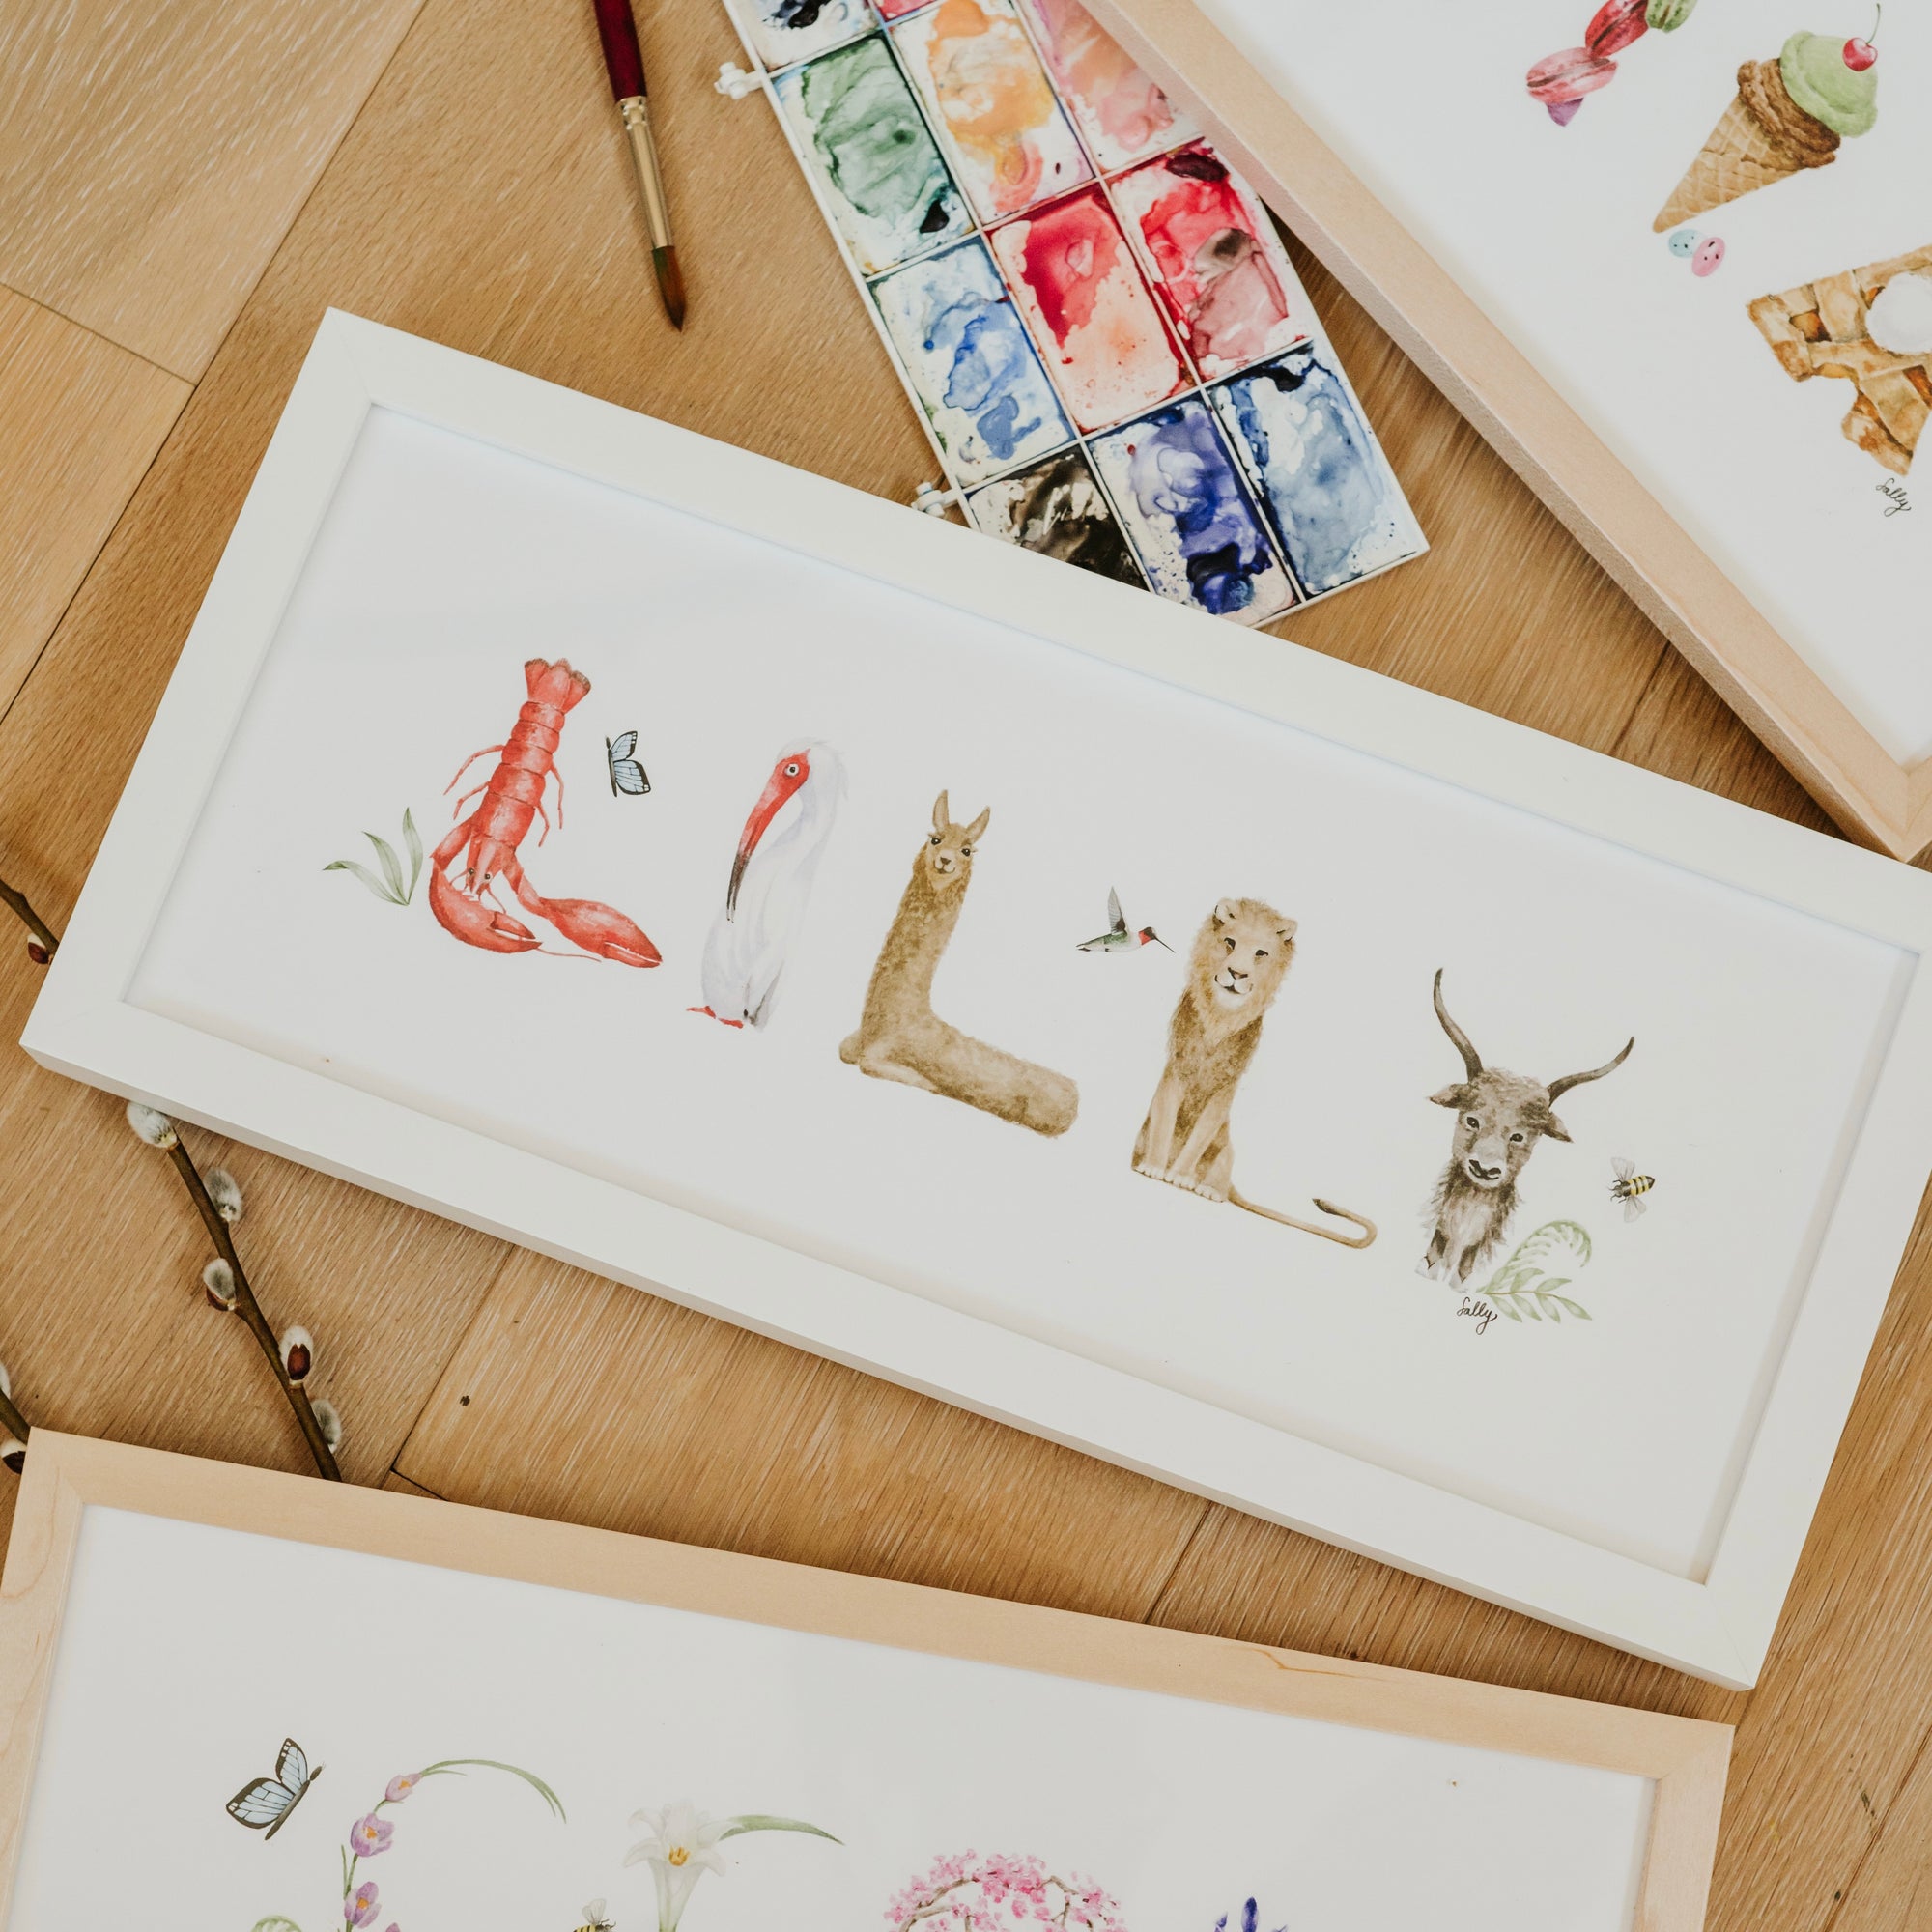 "Lilly" Animal Name Print in a white frame